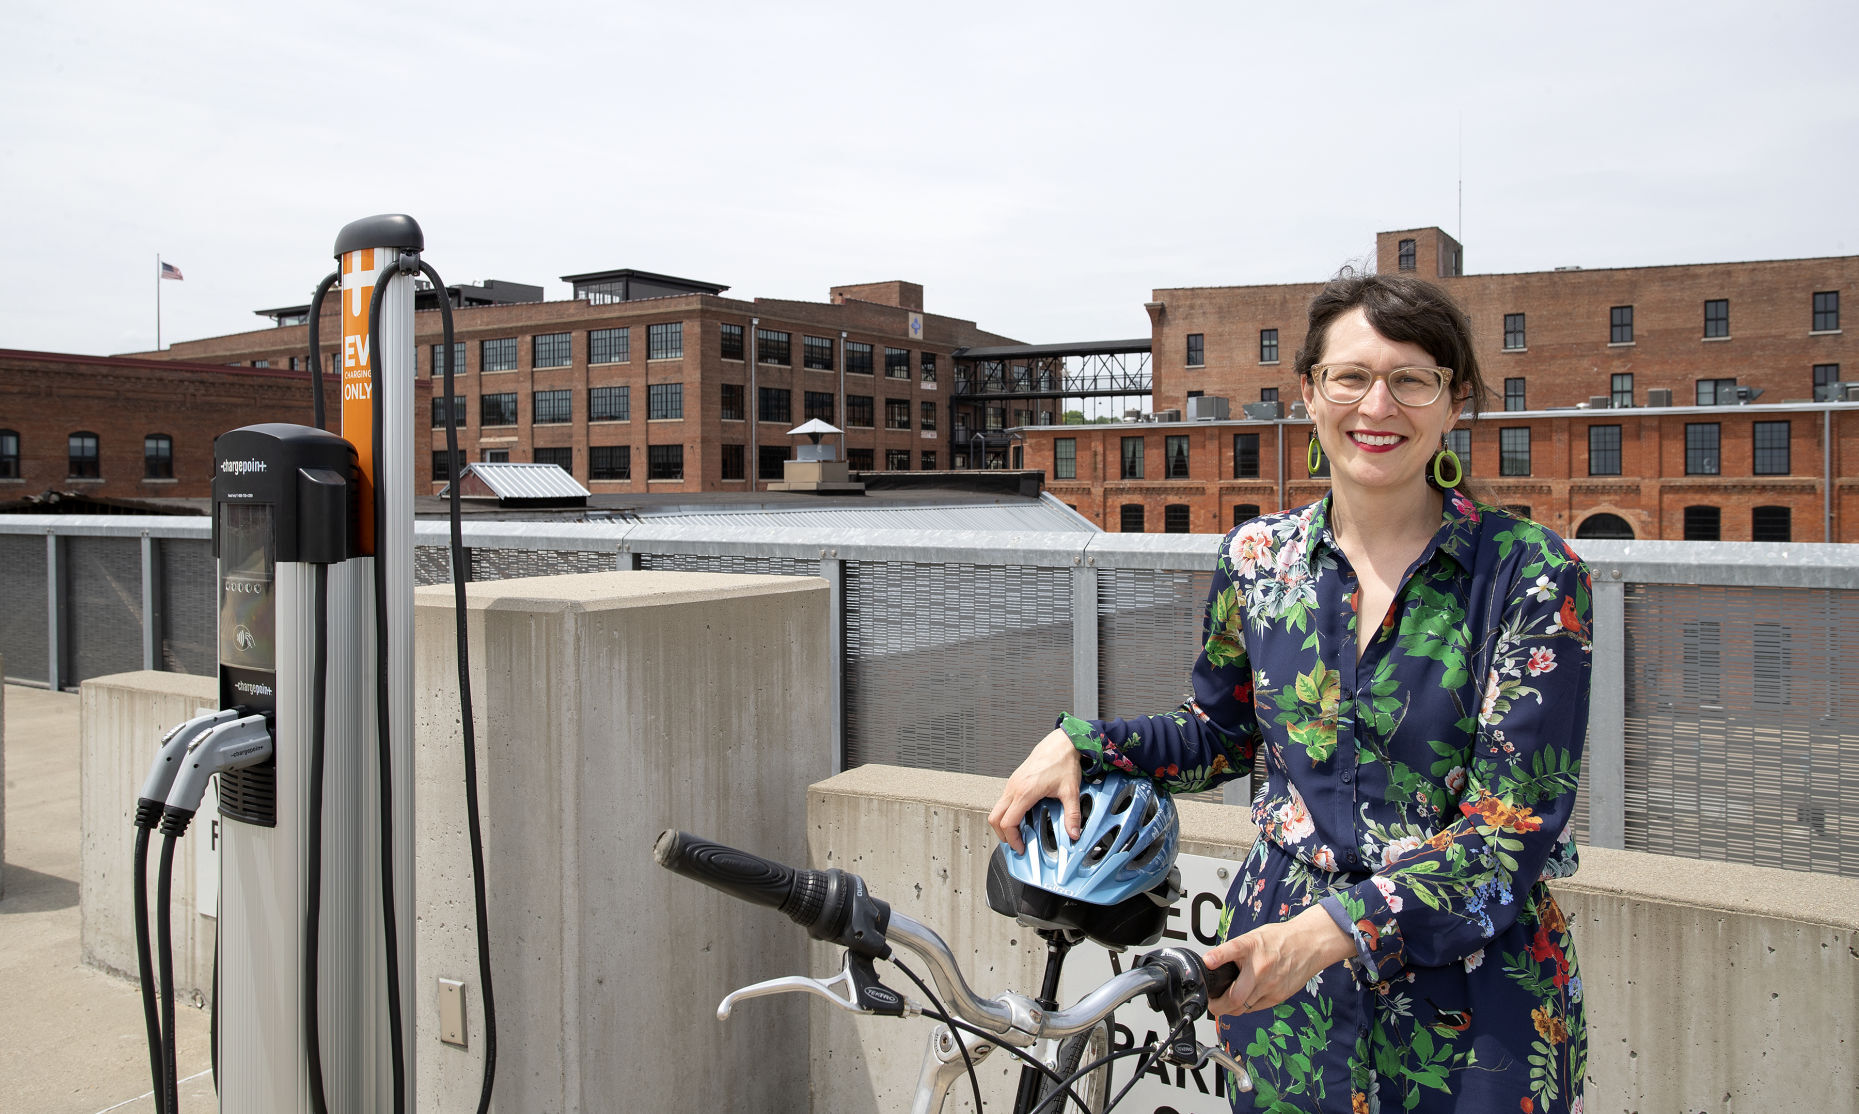 Candace Eudaley-Loebach, of Dubuque, launched Lovely City Consulting to help local businesses and nonprofits see the benefits of sustainable transportation.    PHOTO CREDIT: Stephen Gassman